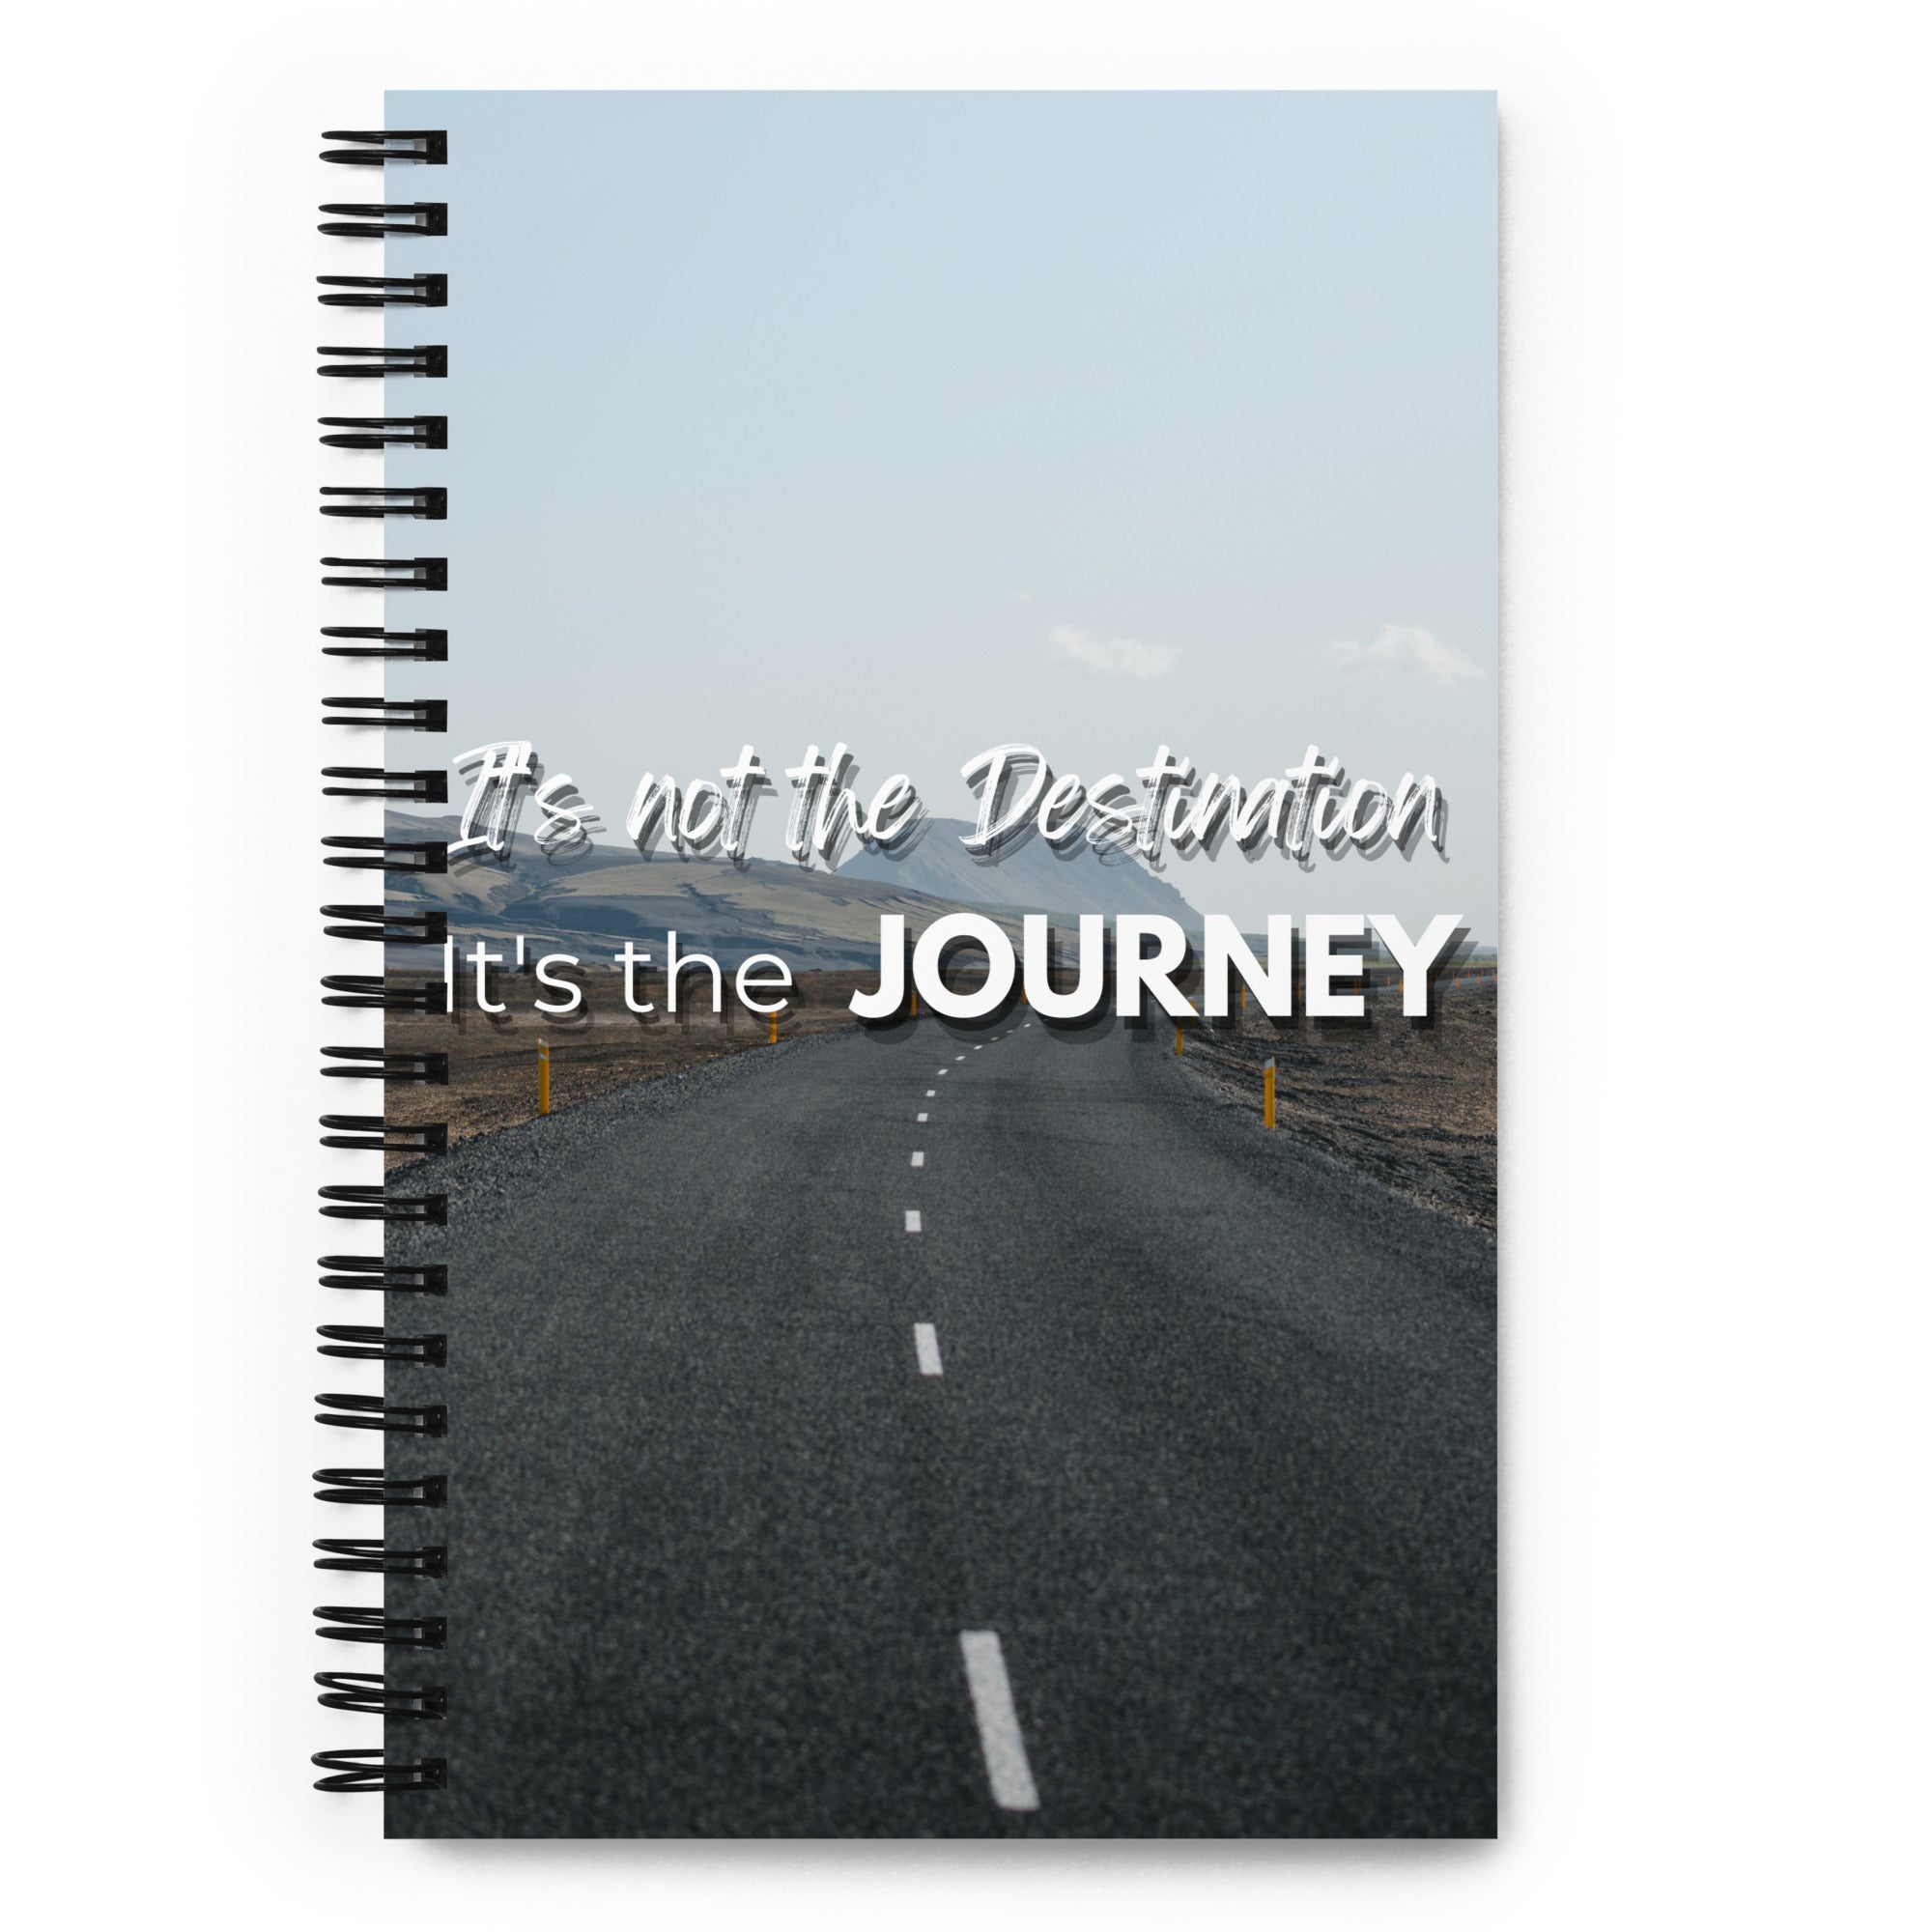 It's the Journey - Spiral Notebook